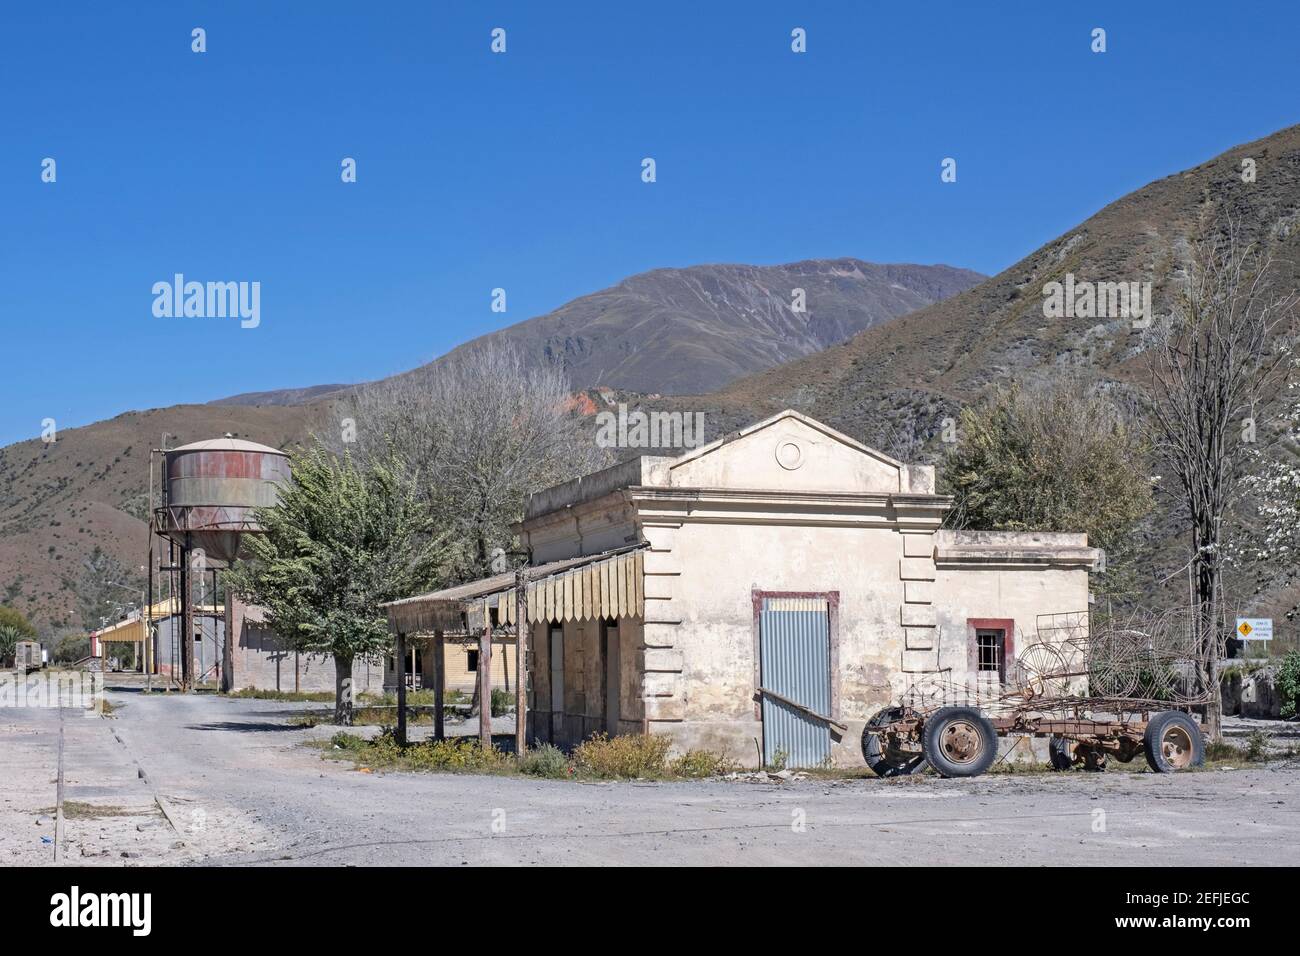 Old train station of the General Belgrano railway in the village Volcán along the National Route 9 / Ruta Nacional 9 in the Jujuy Province, Argentina Stock Photo